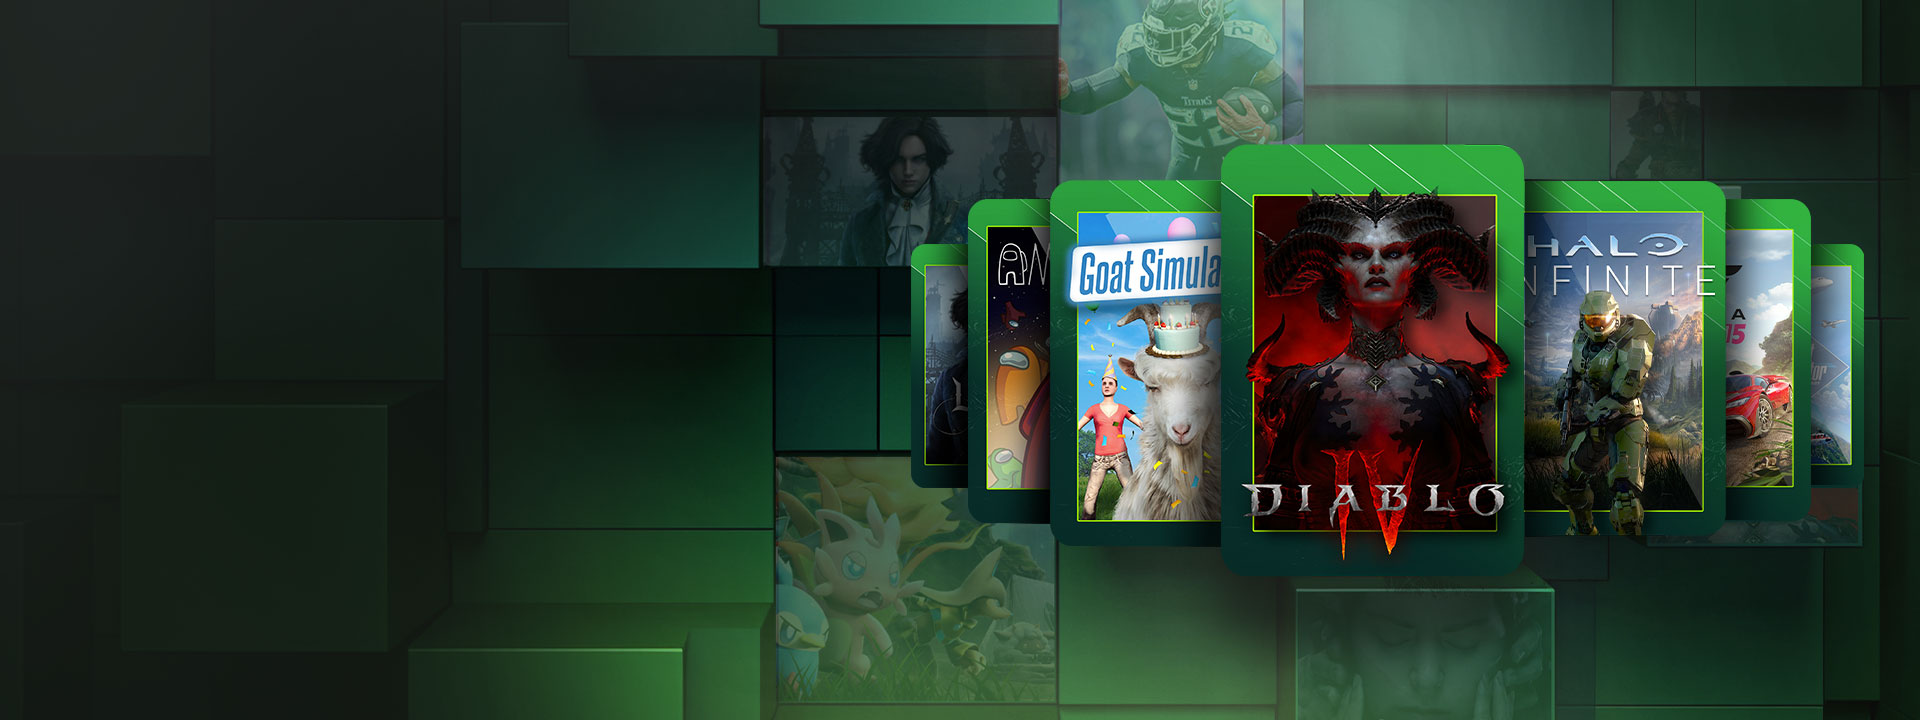 Games including Diablo IV, Goat Simulator, and Halo Infinite shown as playing cards with a green border, over a background of green abstract boxes